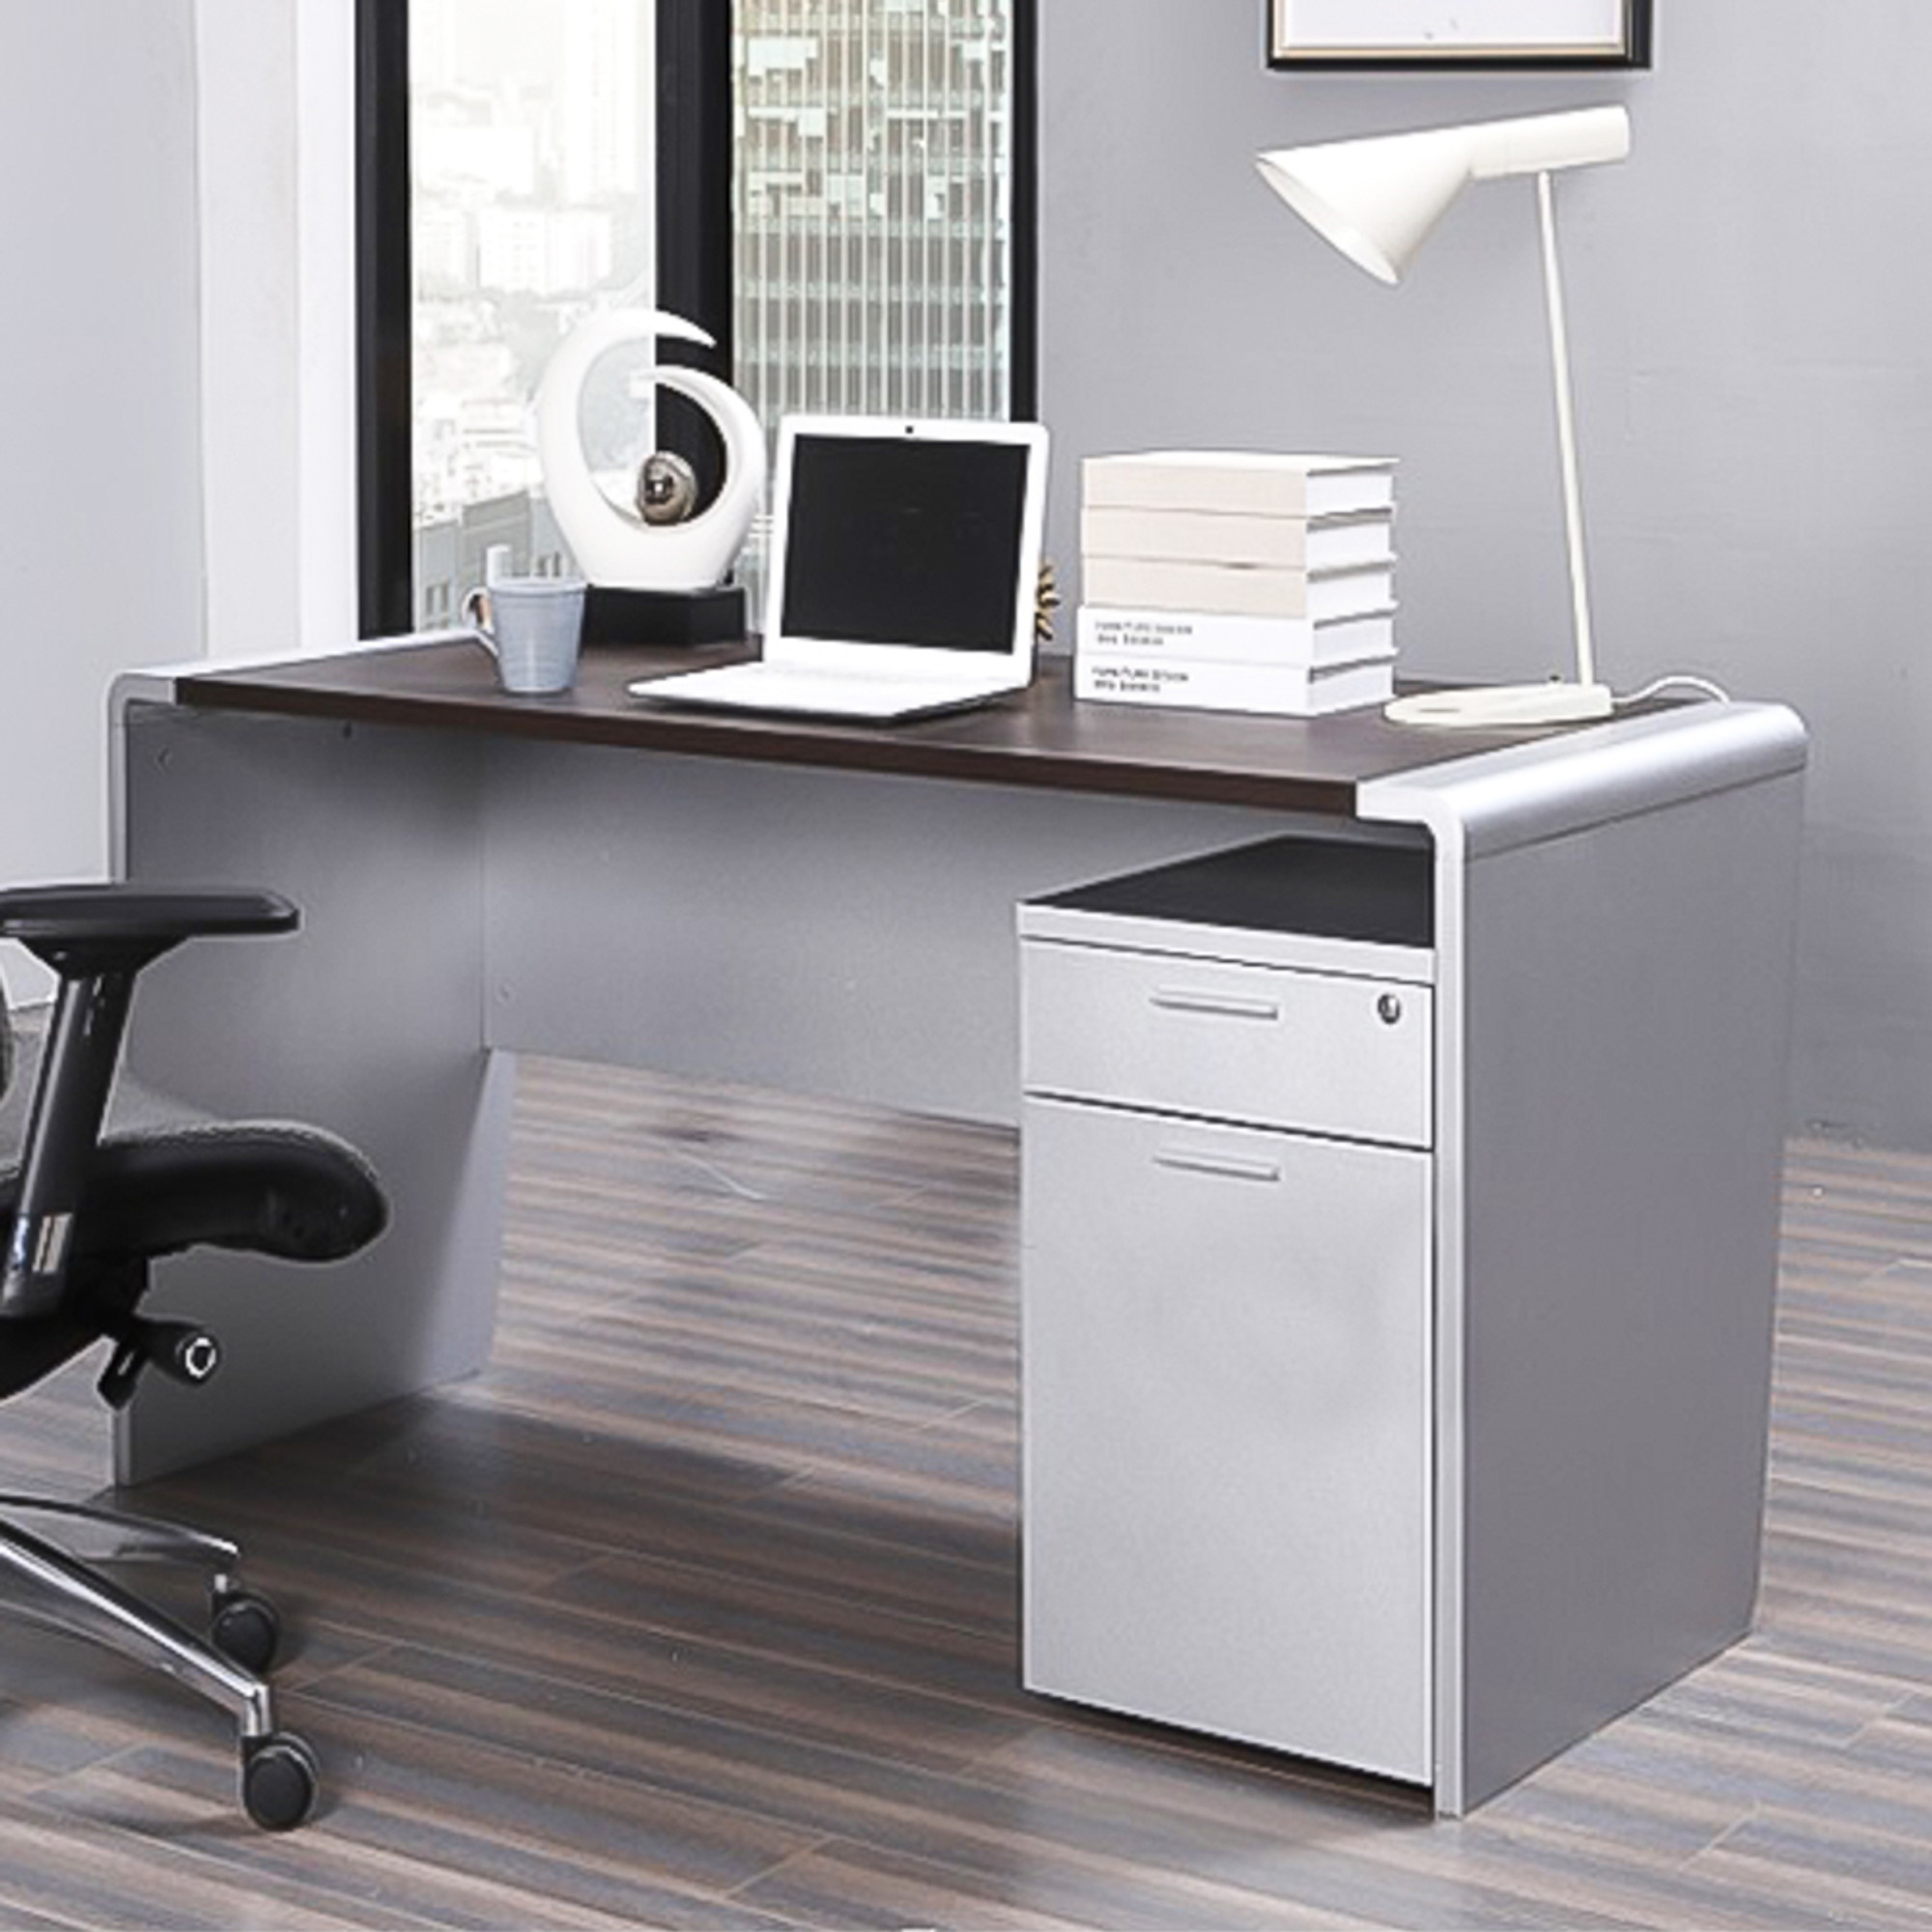 Silver and wood veneer office desk with matching Catalina pedestal.